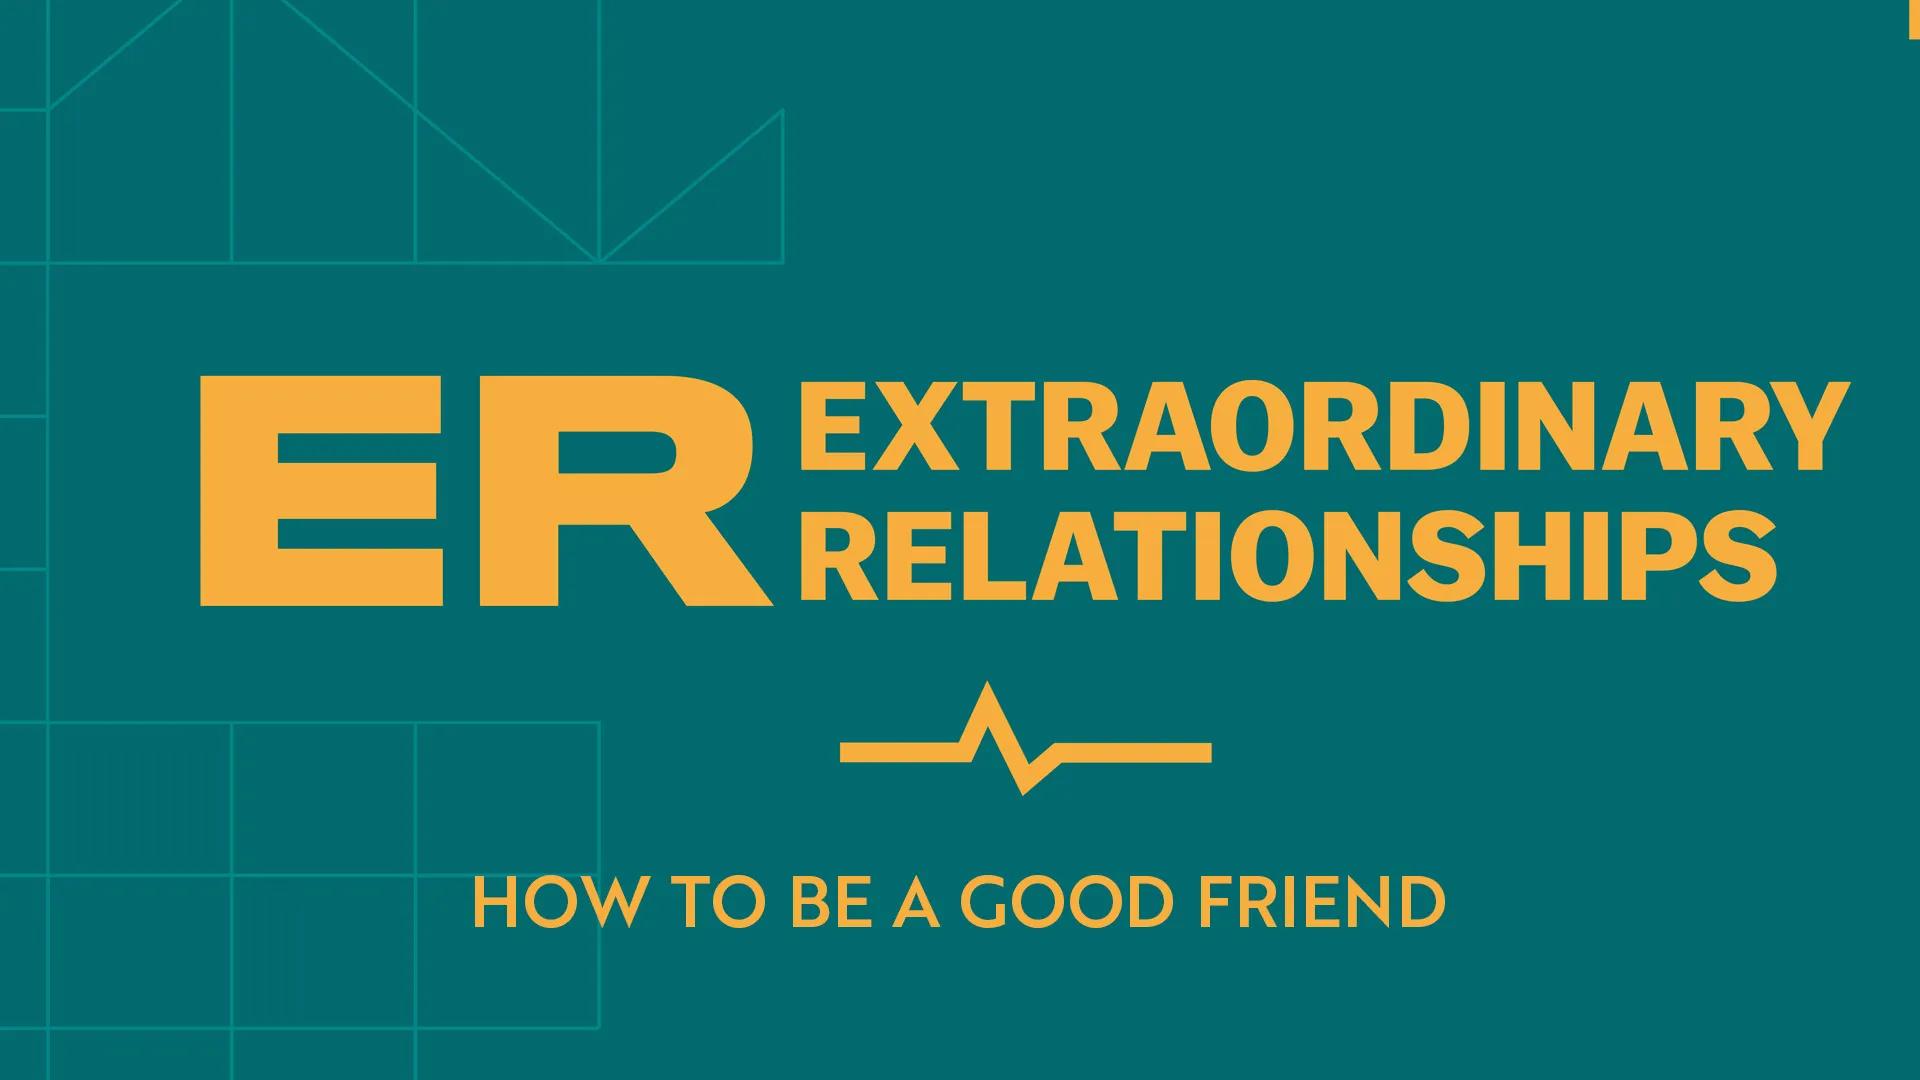 A teal background with yellow words that say "extraordinary relationship" and "how to be a good friend"